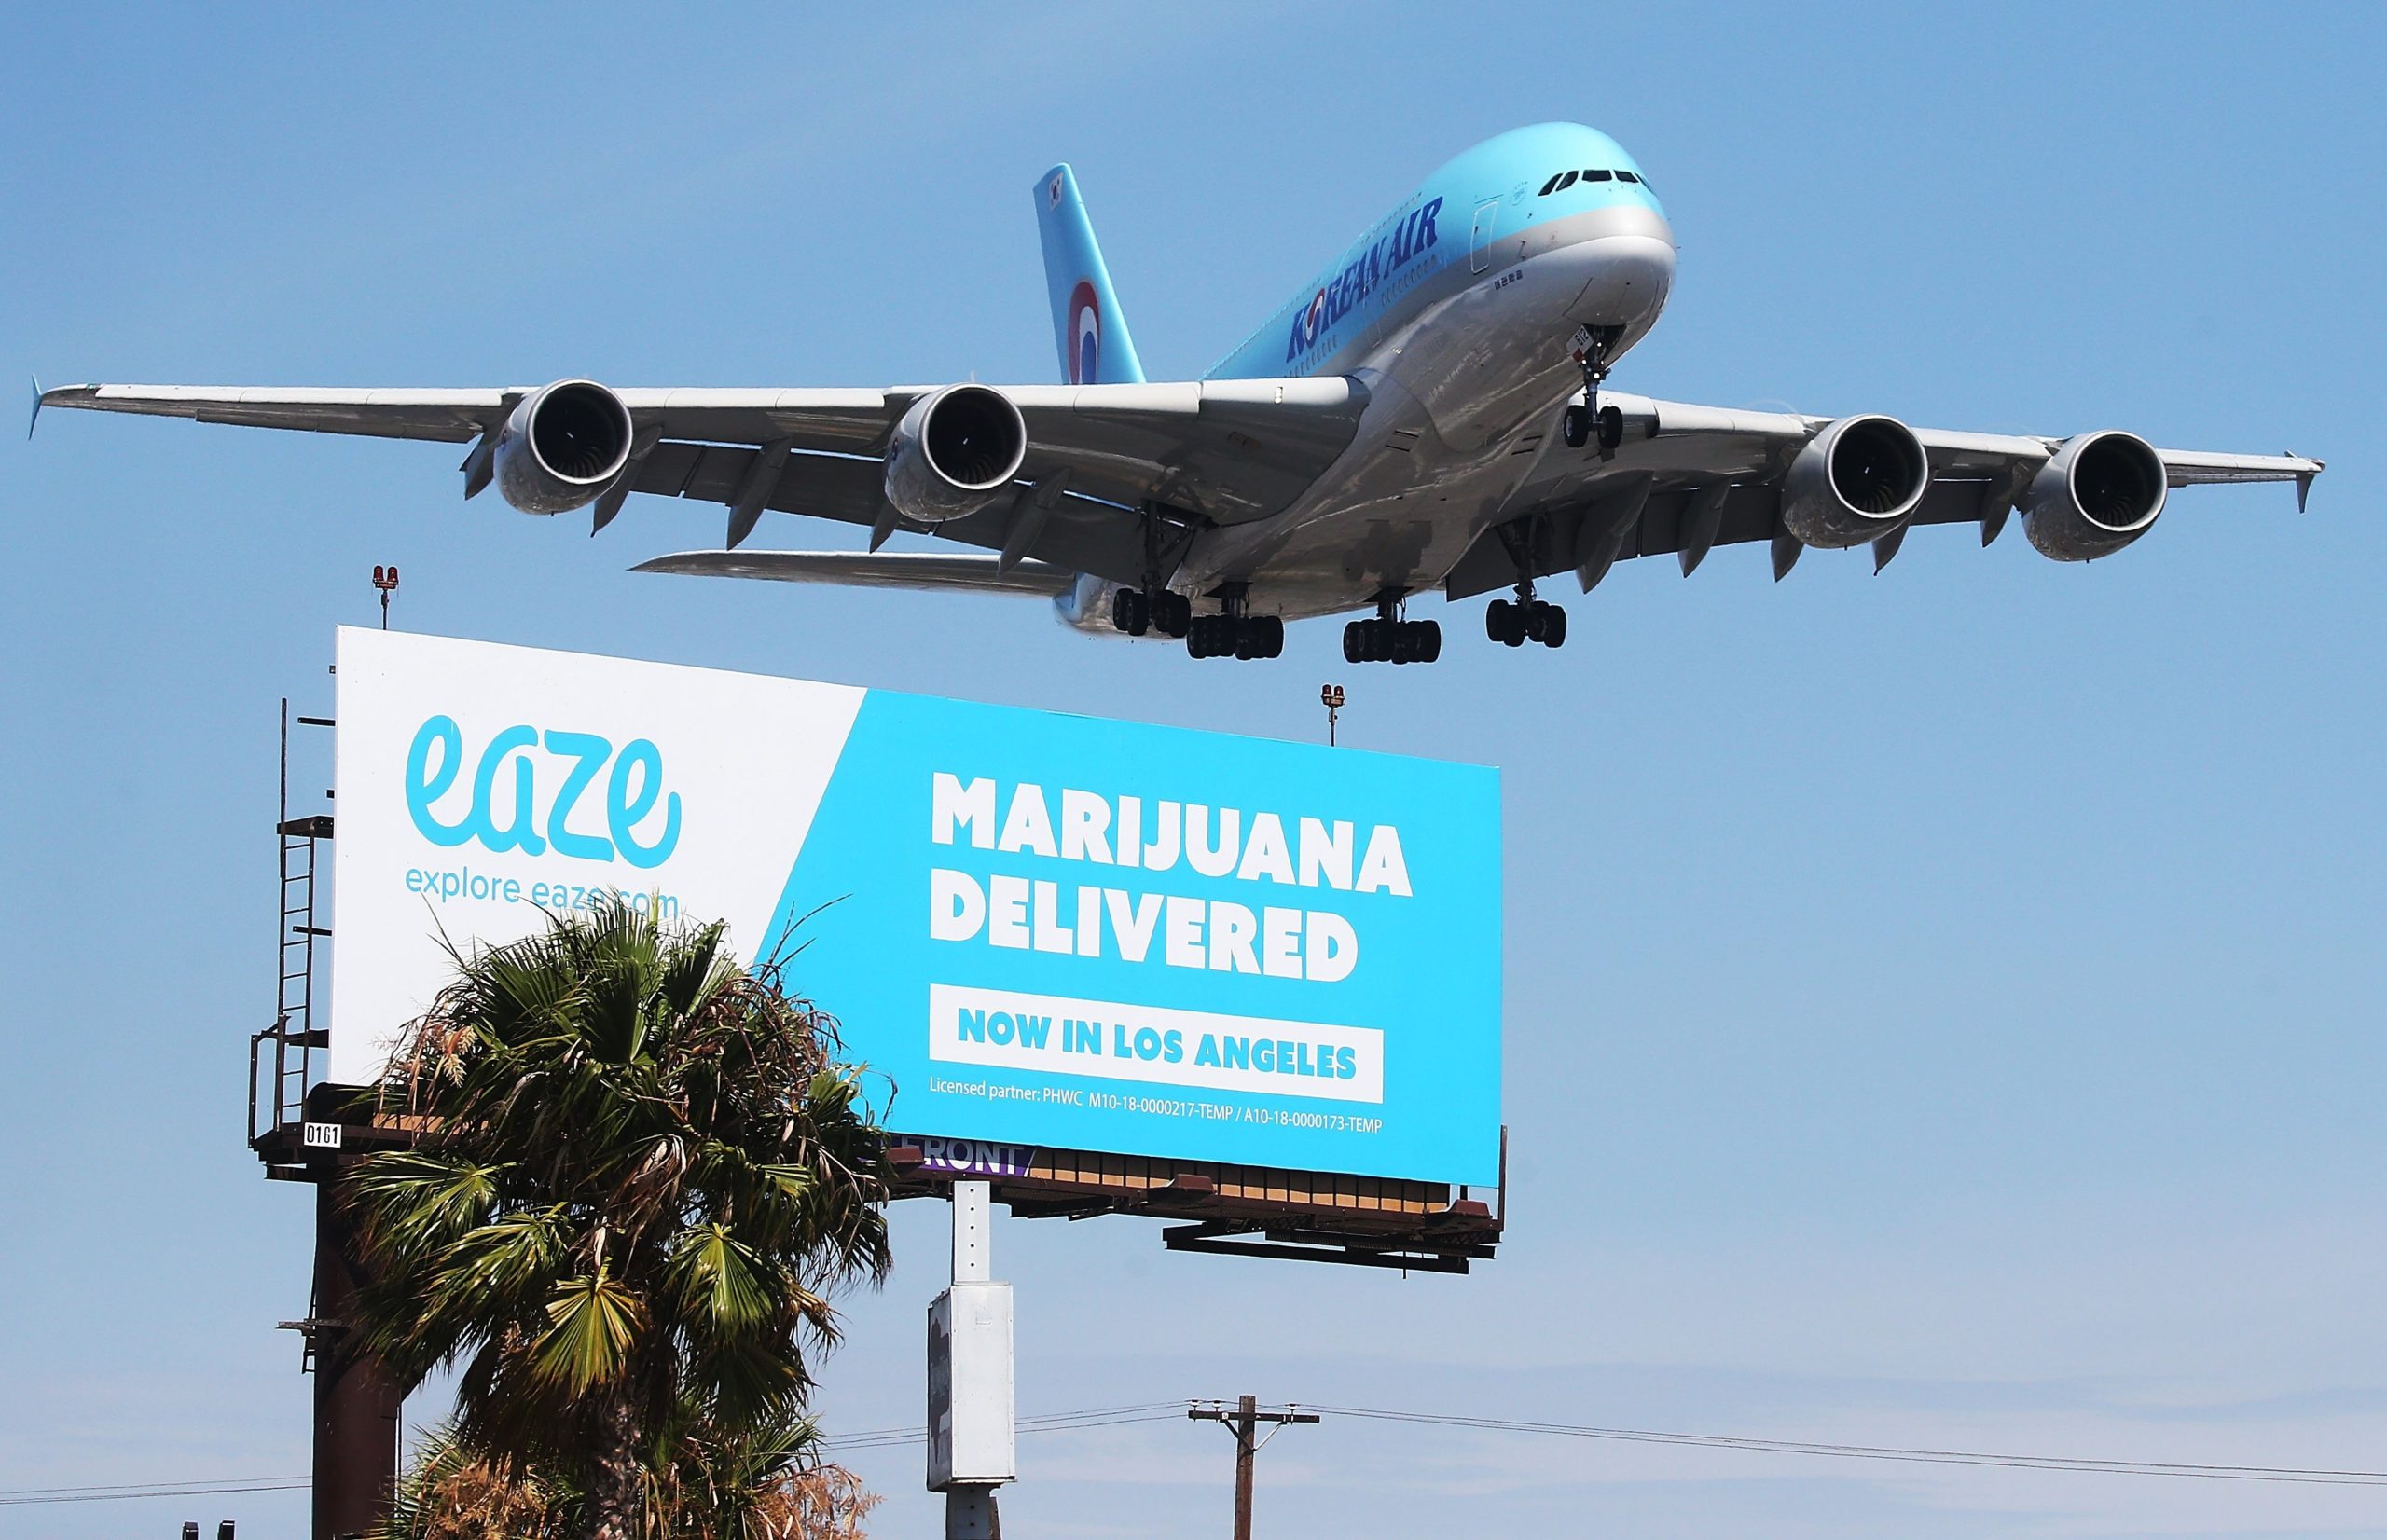 Yes, You Can Carry Marijuana at the Los Angeles Airport